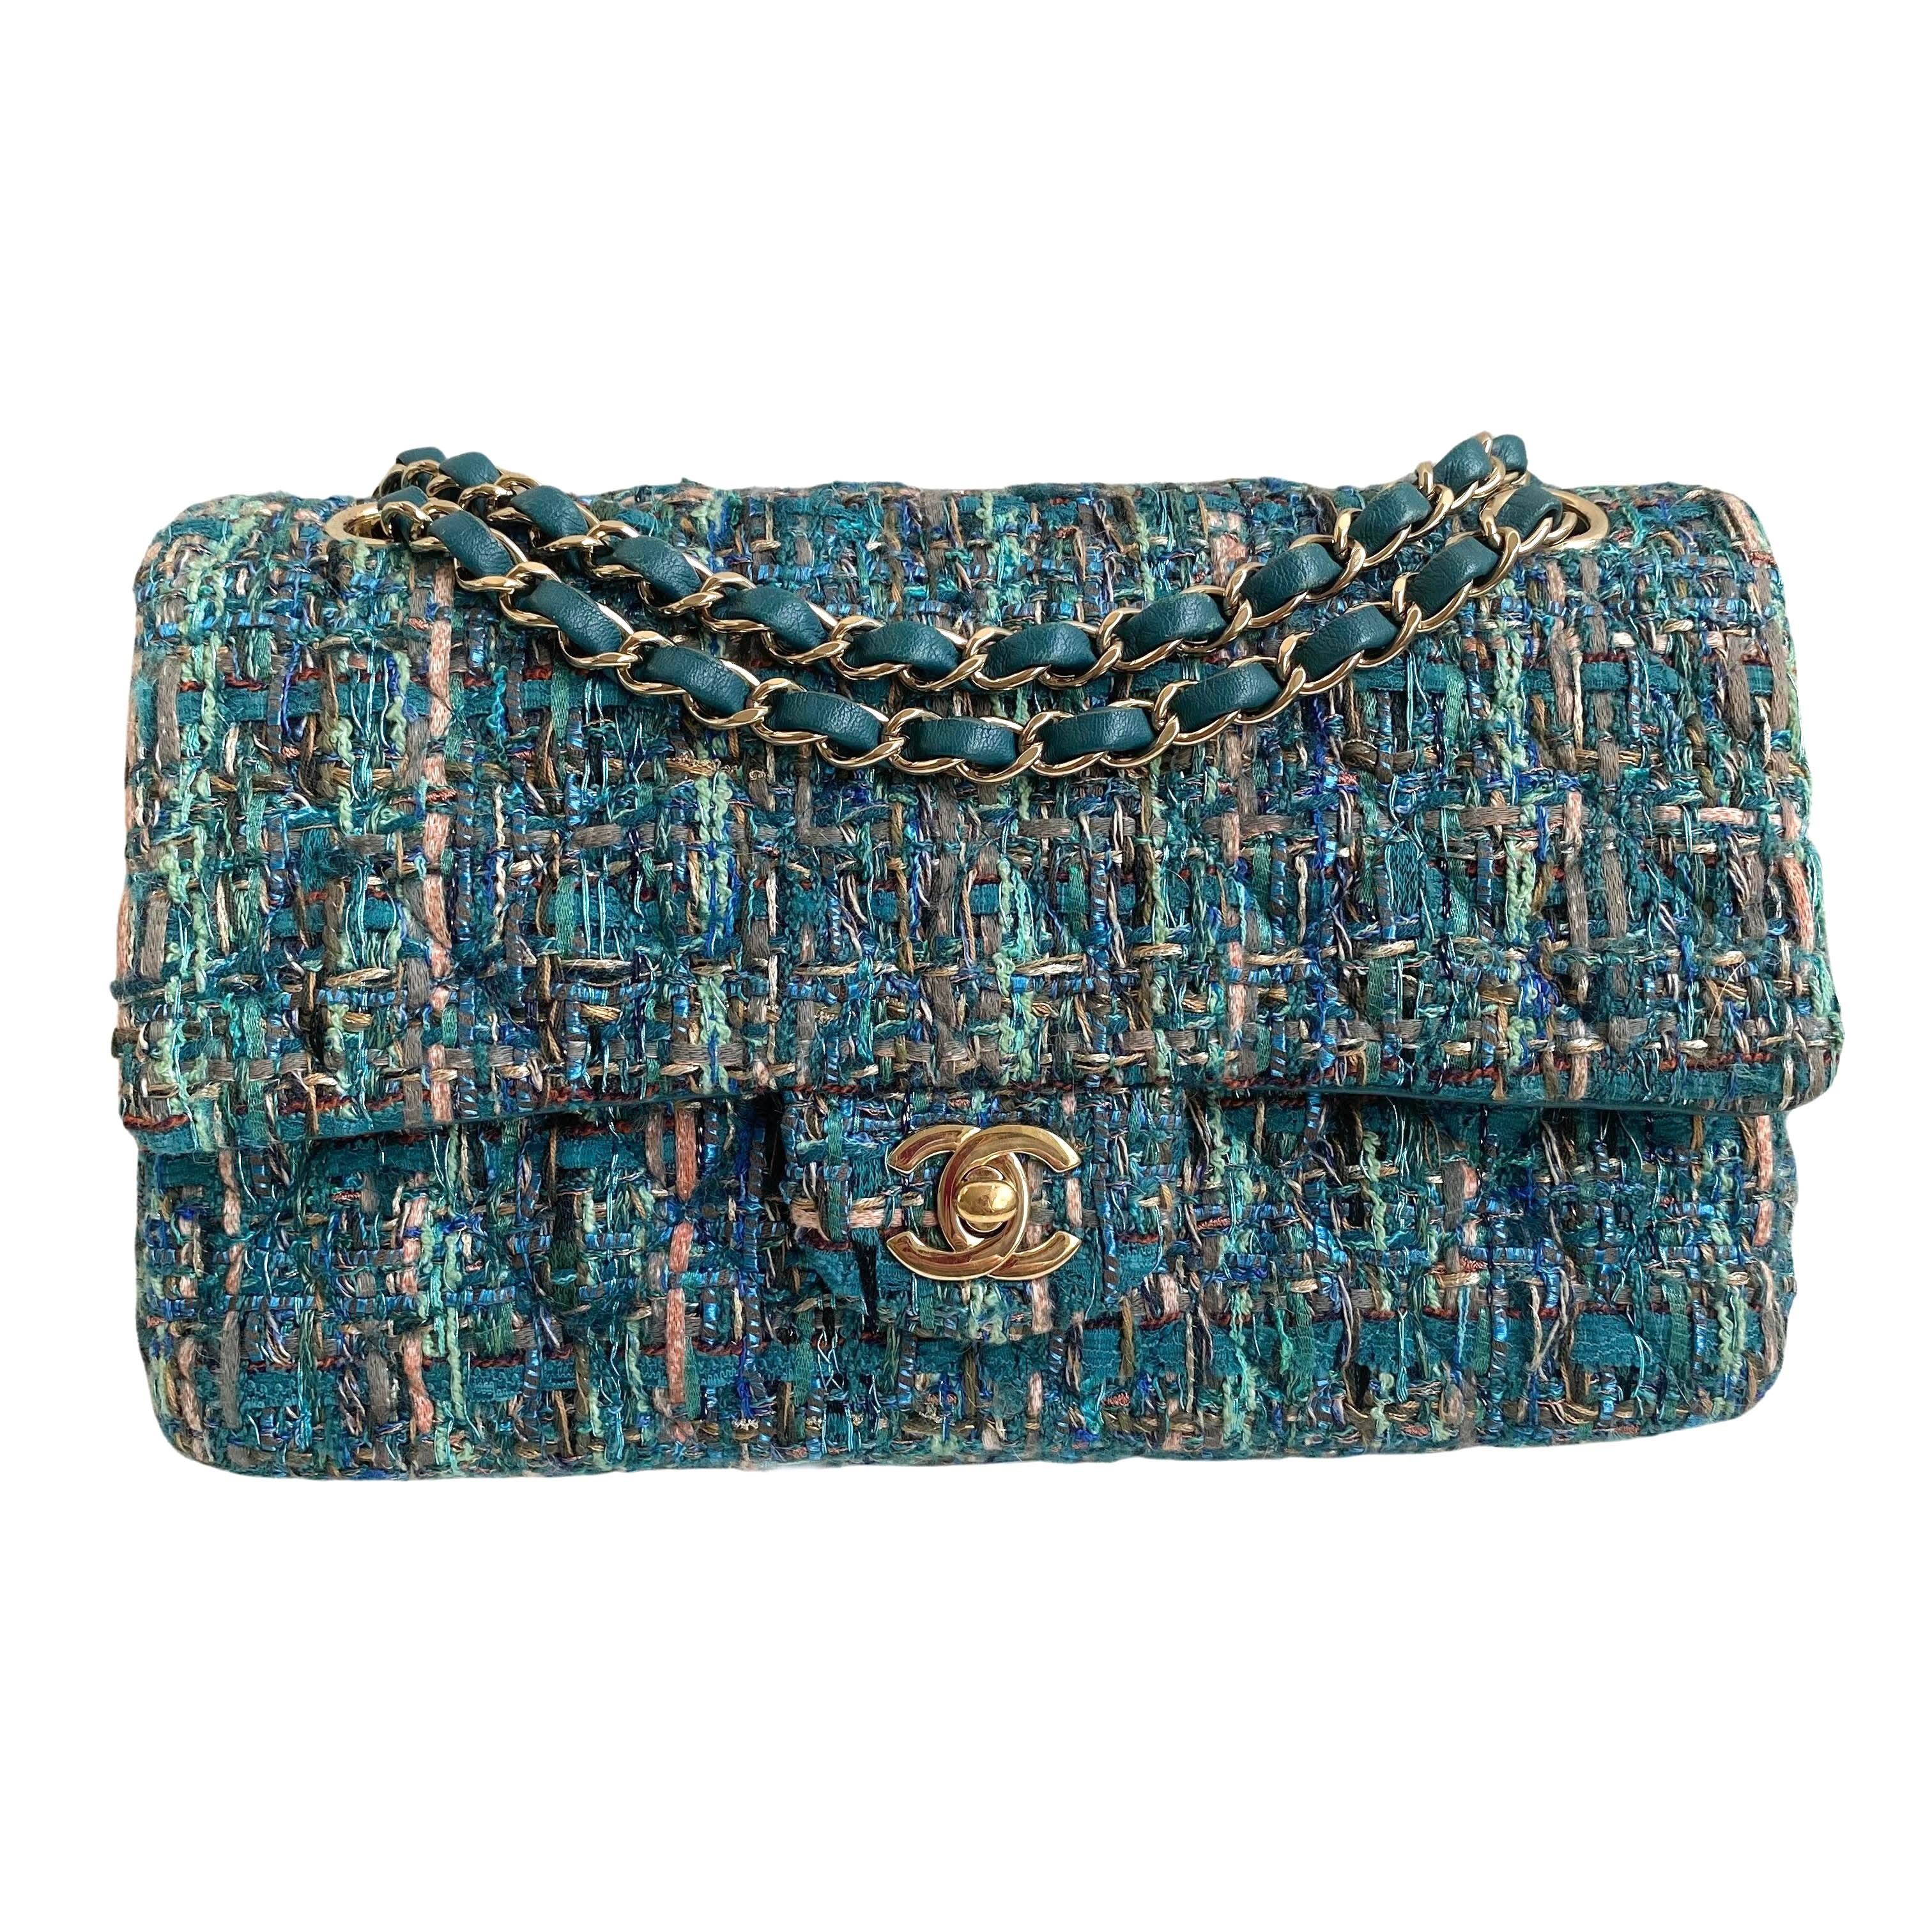 CHANEL 19A Ancient Egypt Turquoise Tweed Medium Classic Double Flap Bag ...